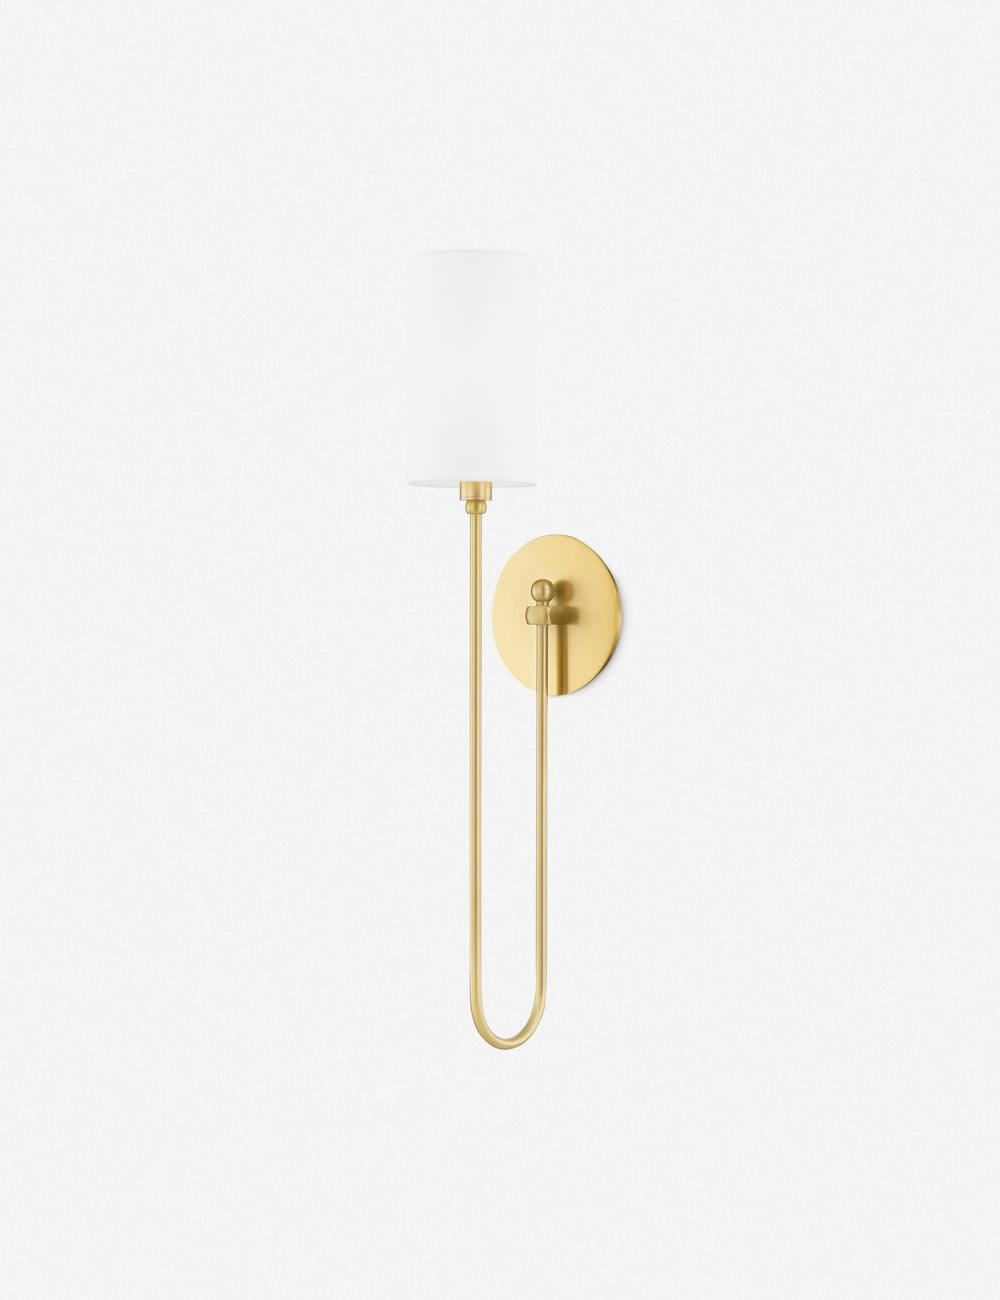 Aged Brass Elegance 1-Light Sconce with Belgian Linen Shade